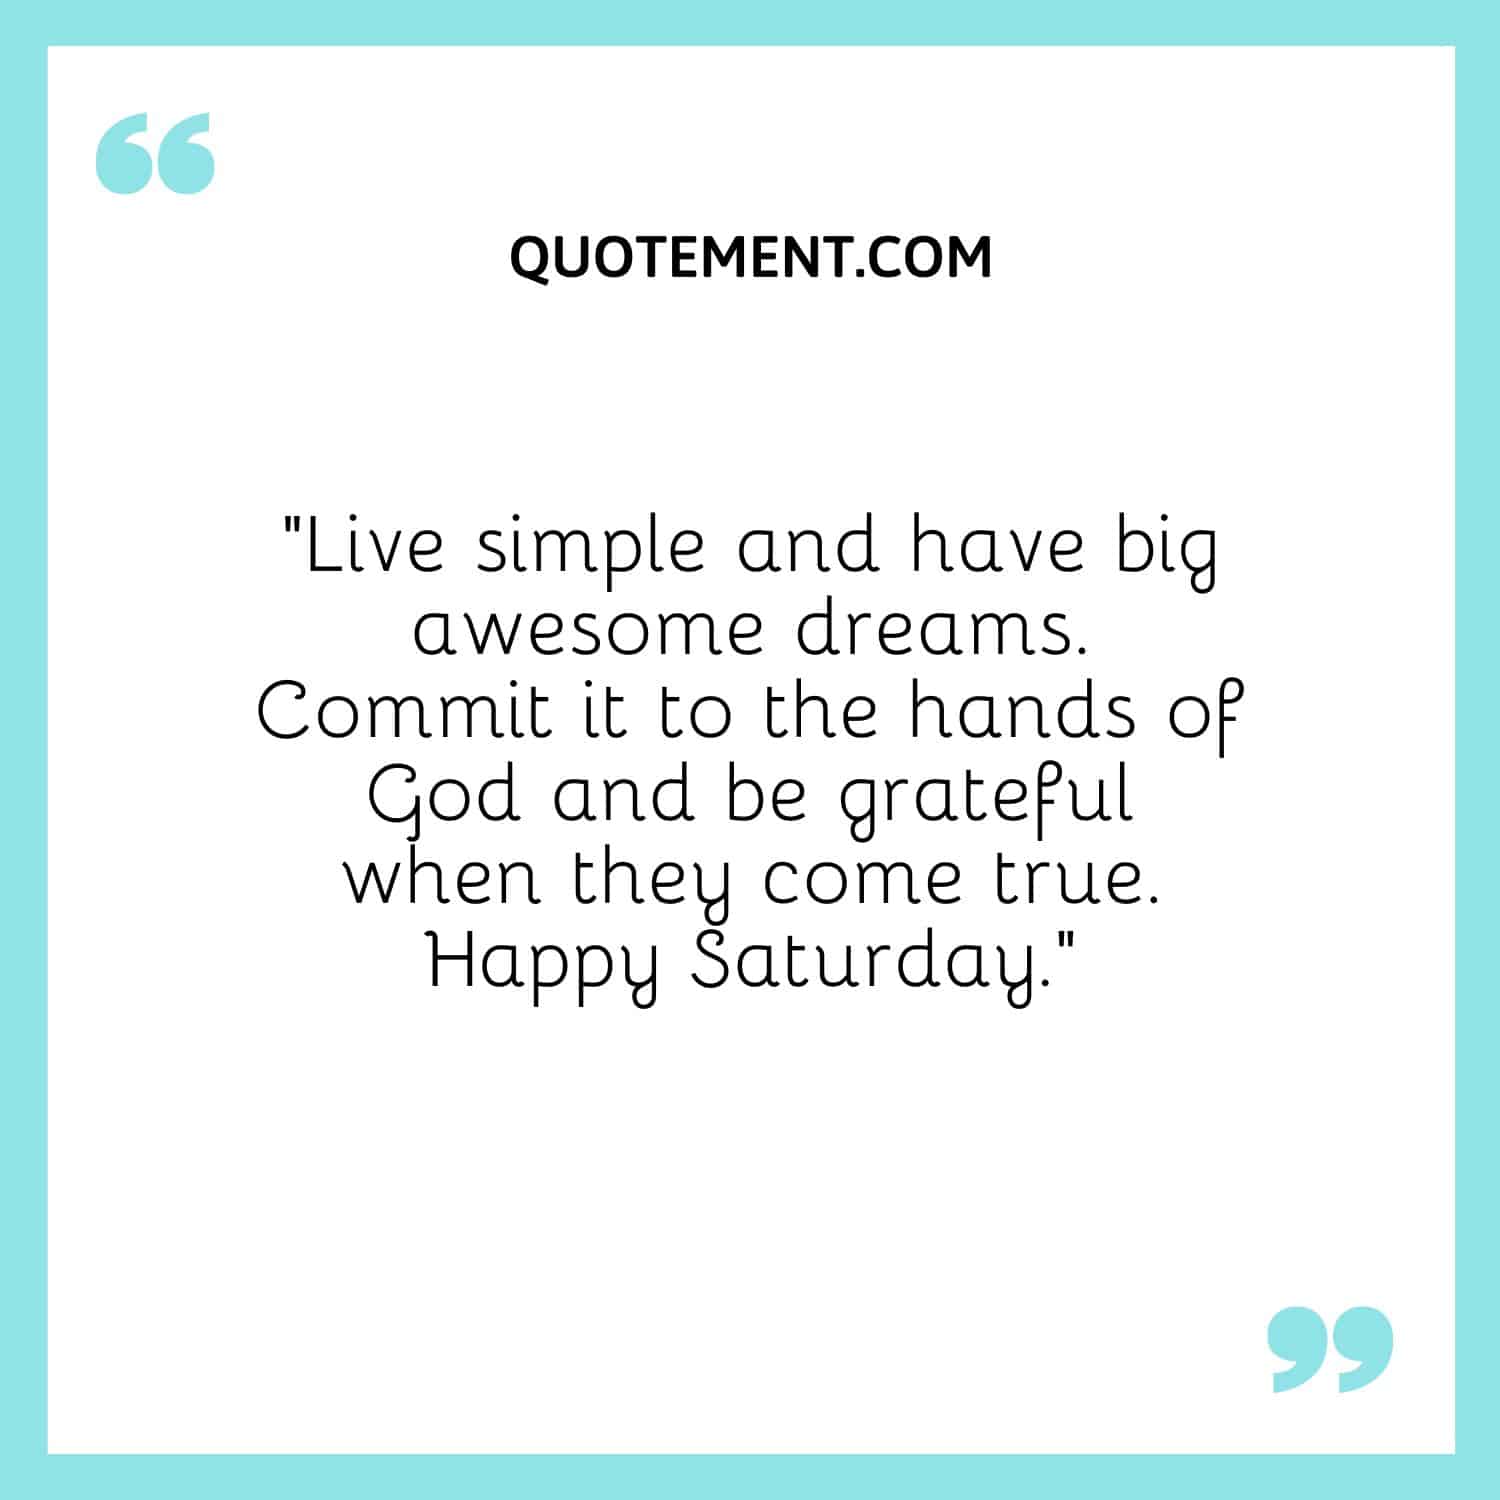 “Live simple and have big awesome dreams. Commit it to the hands of God and be grateful when they come true. Happy Saturday.”